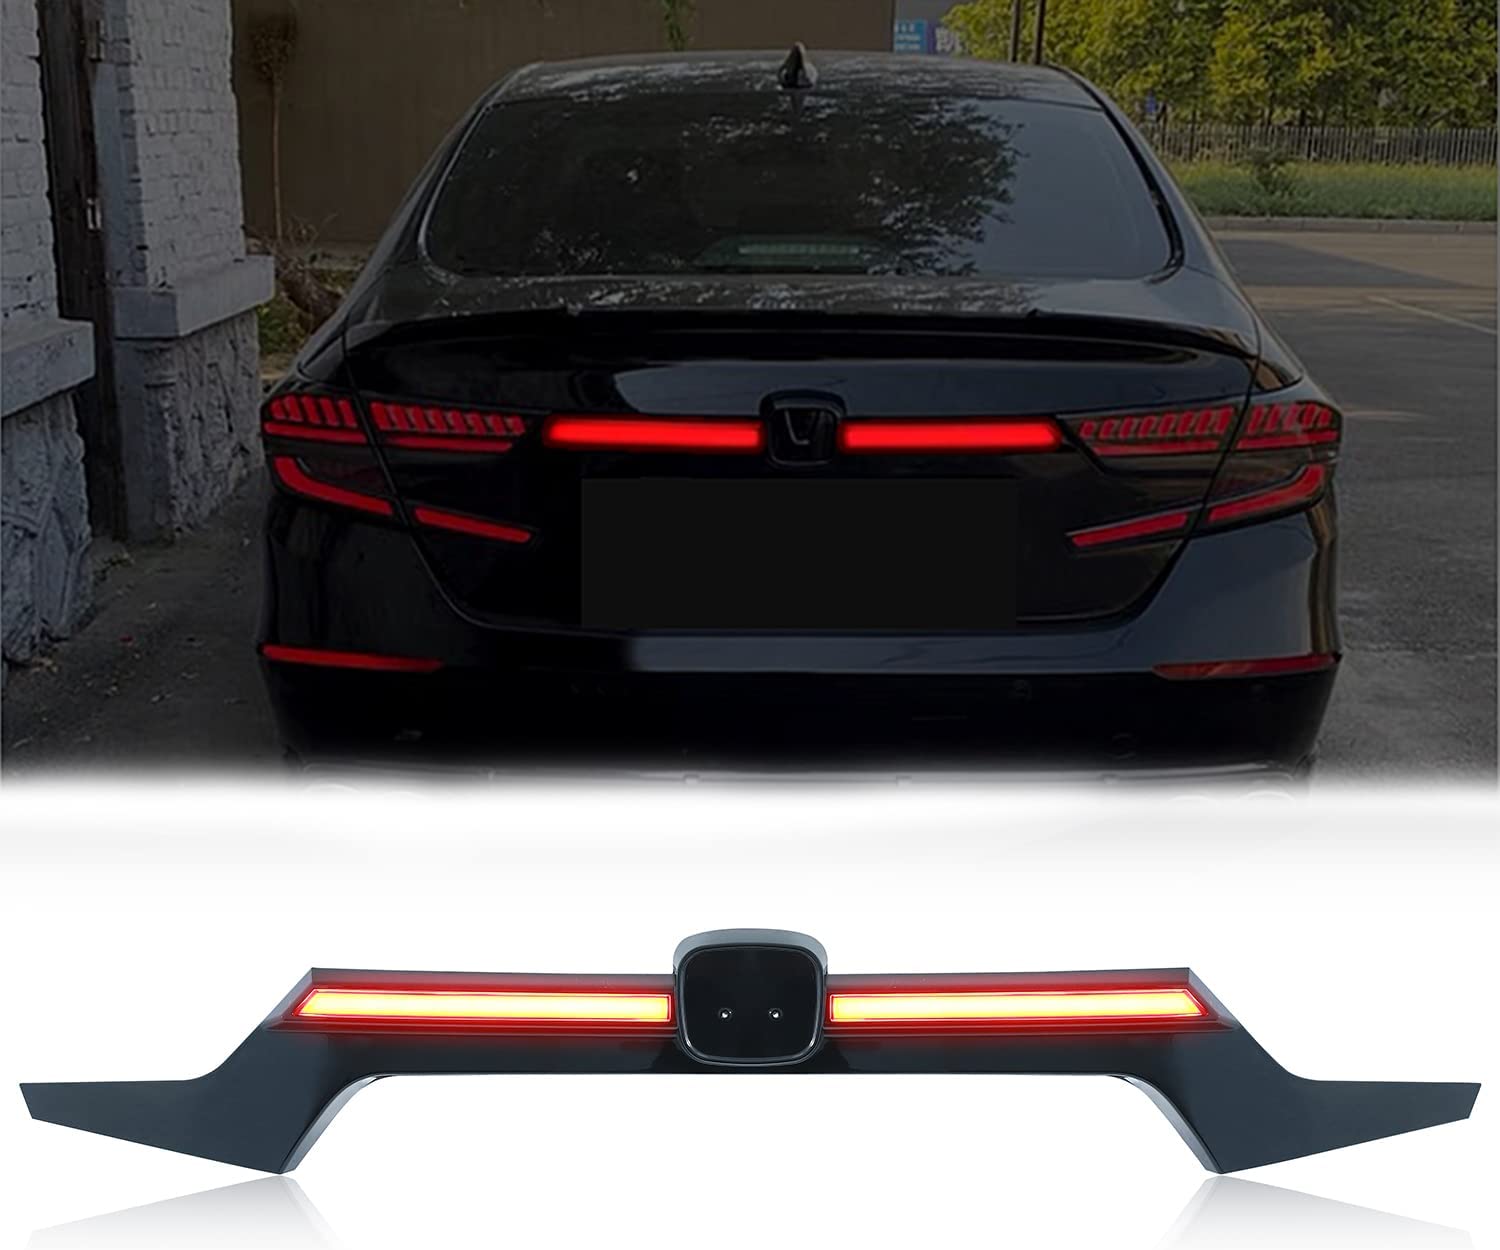 TunerGenix Tail Lights LED Taillight for Honda Accord 18-20